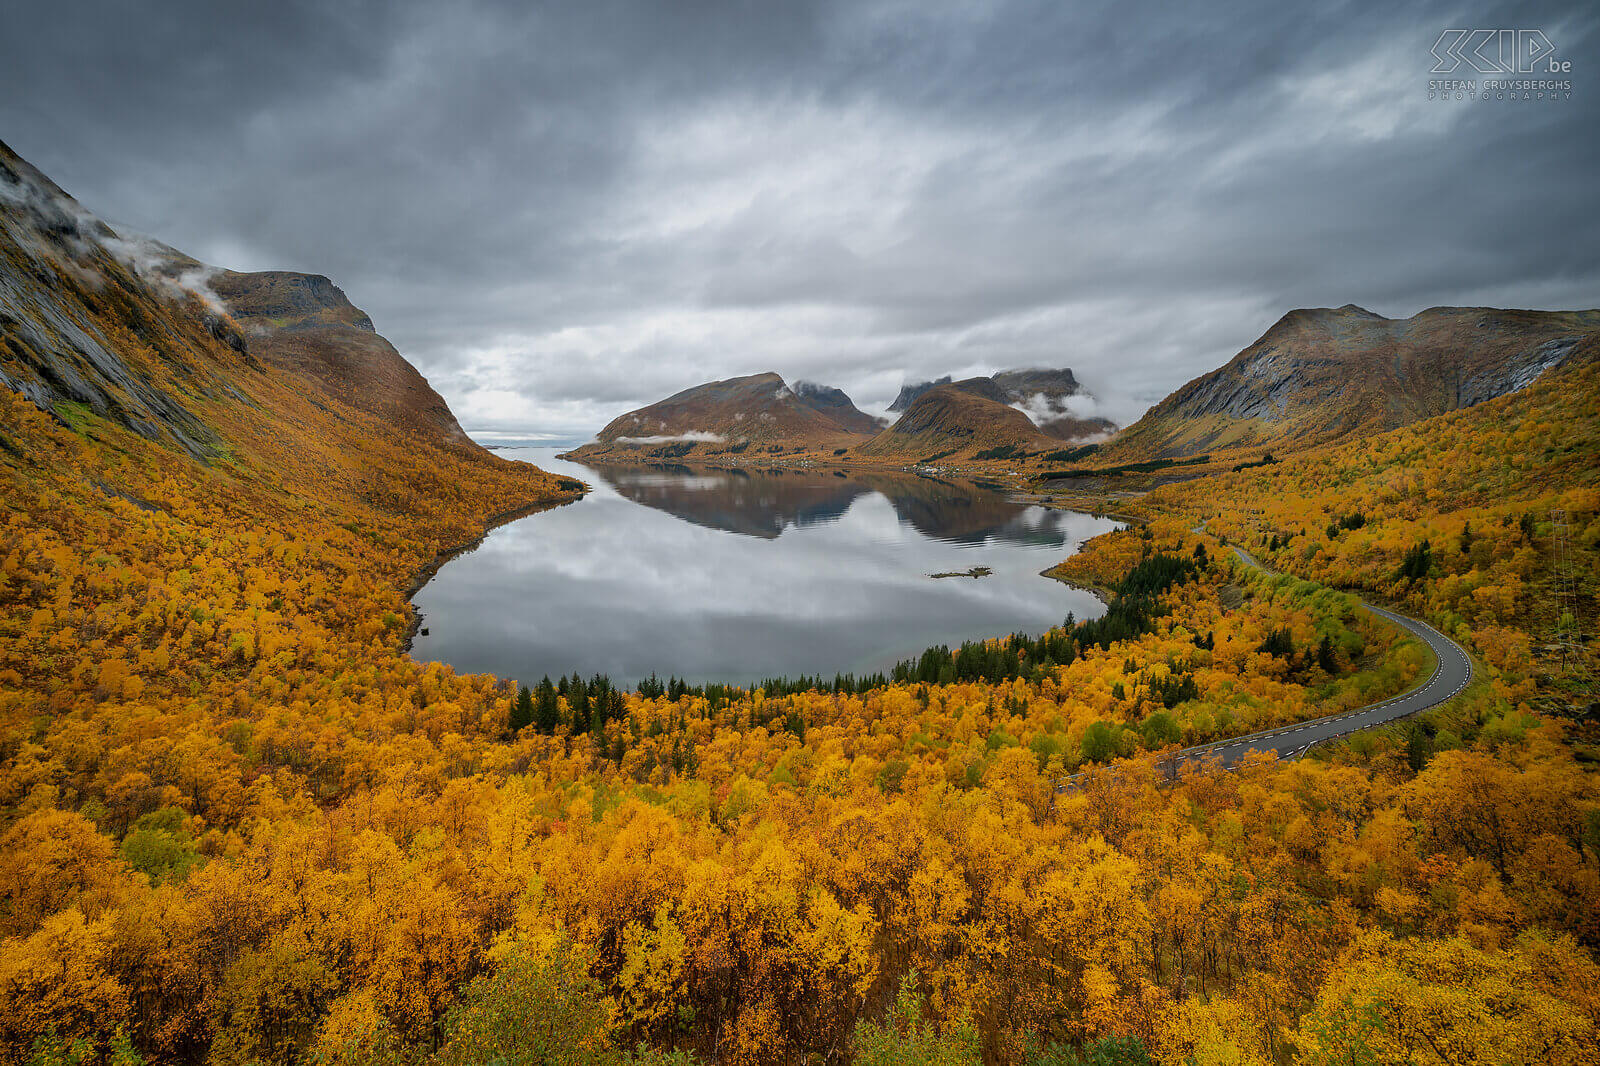 Norway - Senja - Bergsbotn Bergsfjord and the surrounding mountains with beautiful autumn colours. This photo was taken from the popular viewing platform in Bergsbotn on the island of Senja in Norway. Stefan Cruysberghs